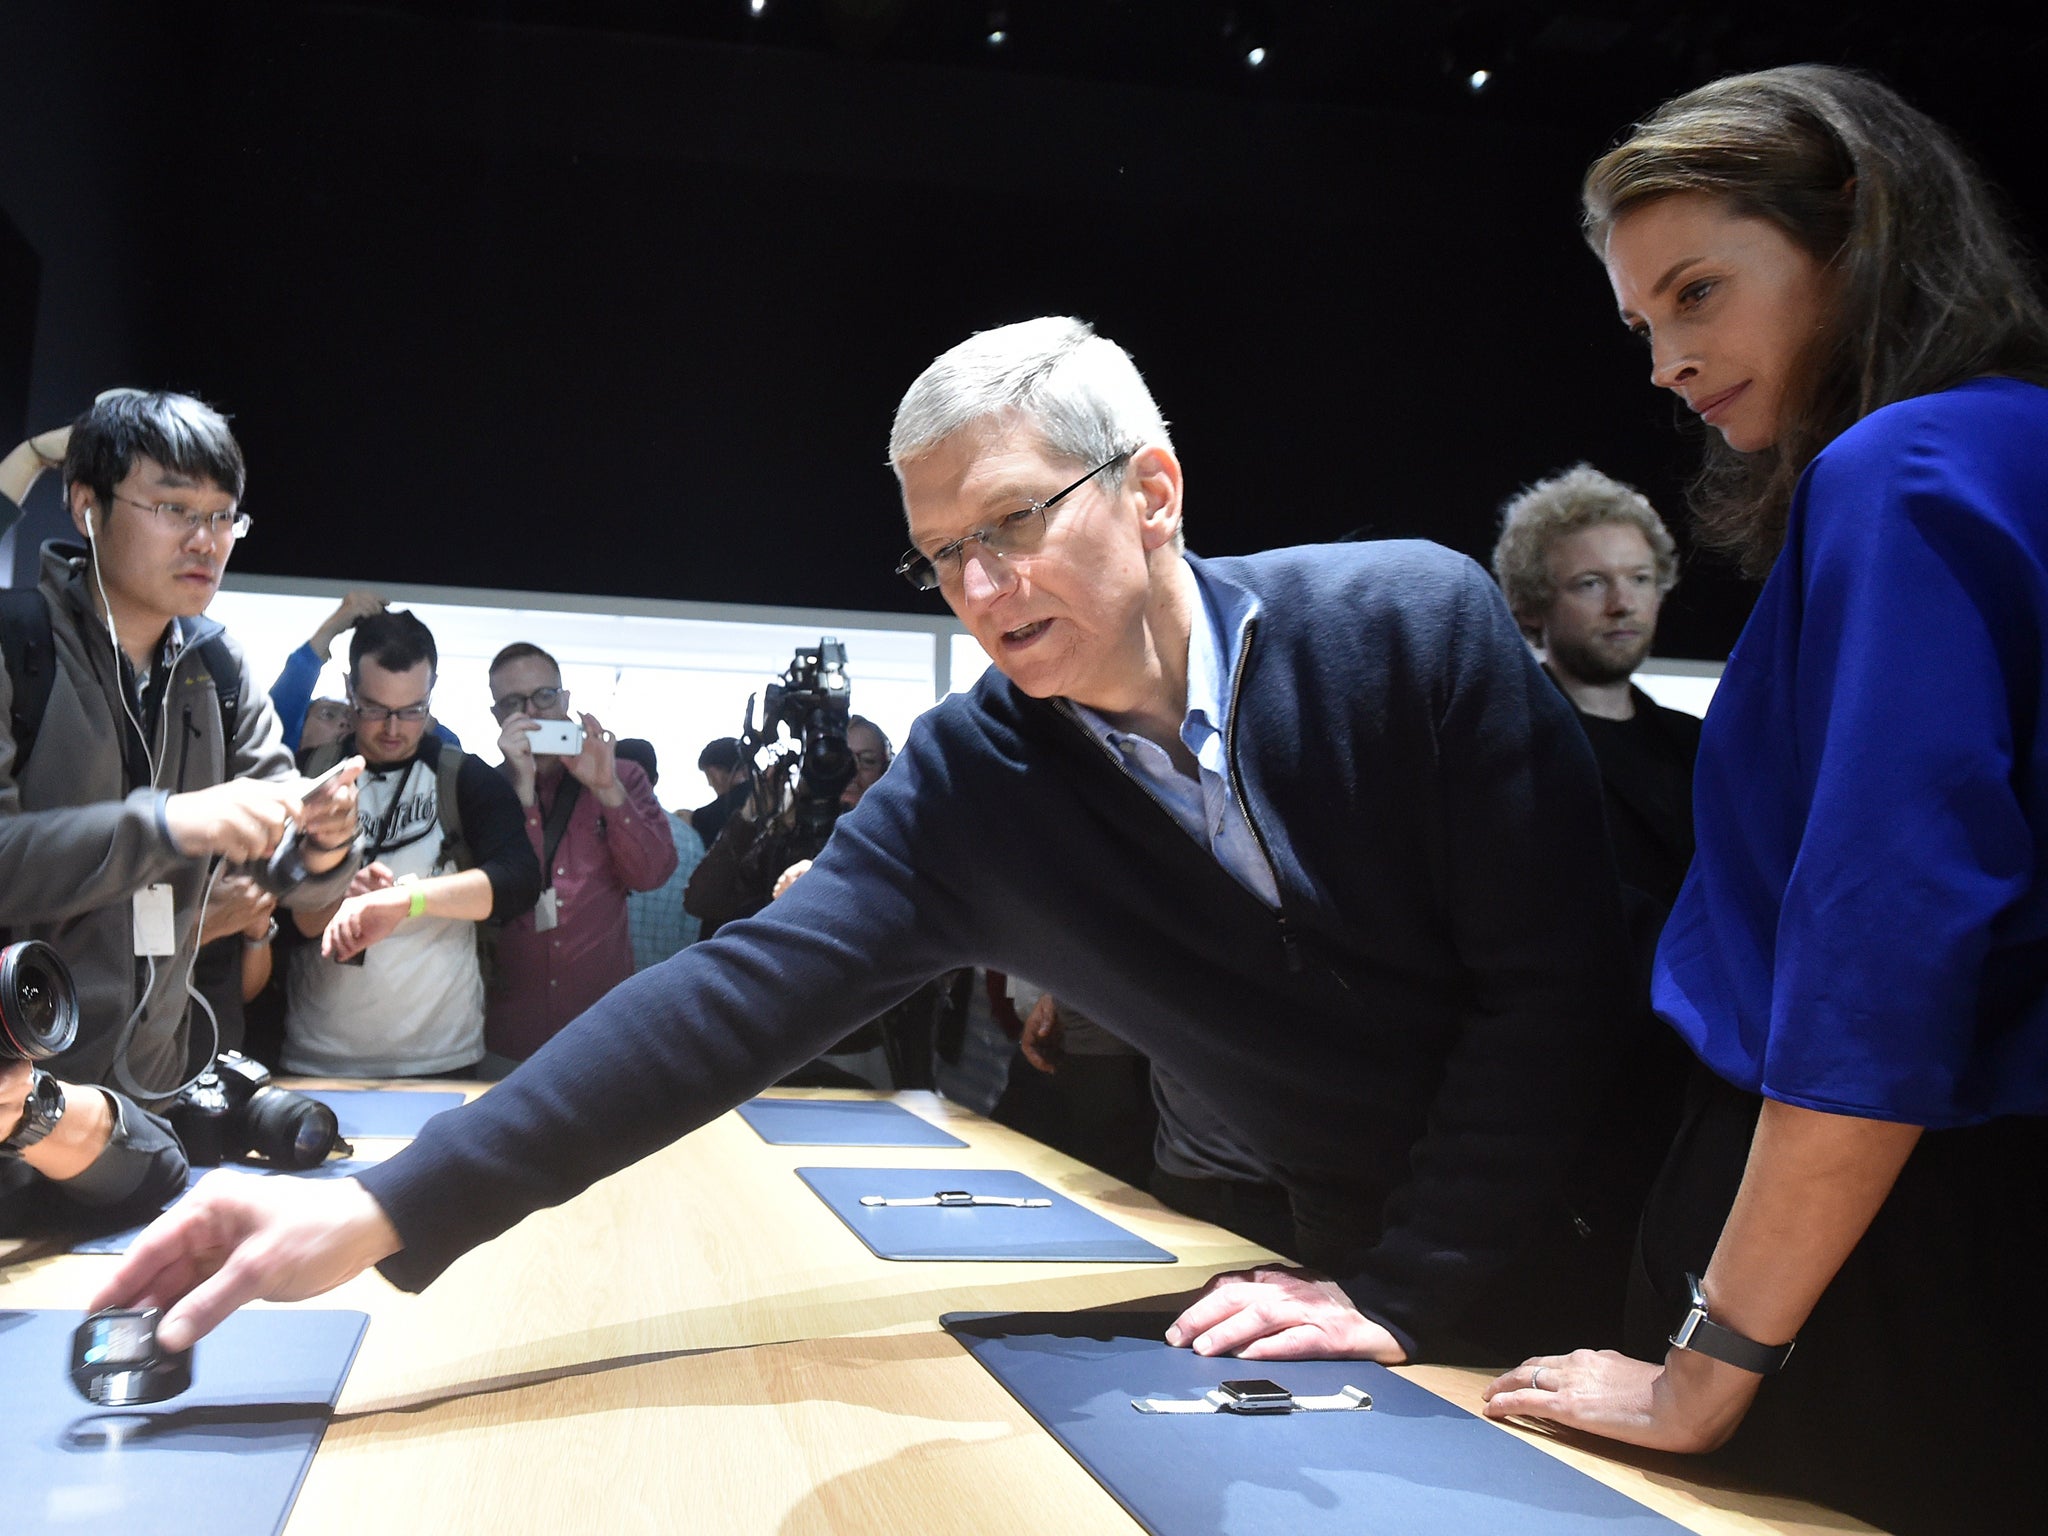 Apple CEO Tim Cook during an Apple media event at the Yerba Buena Center for the Arts in San Francisco, California on March 09, 2015